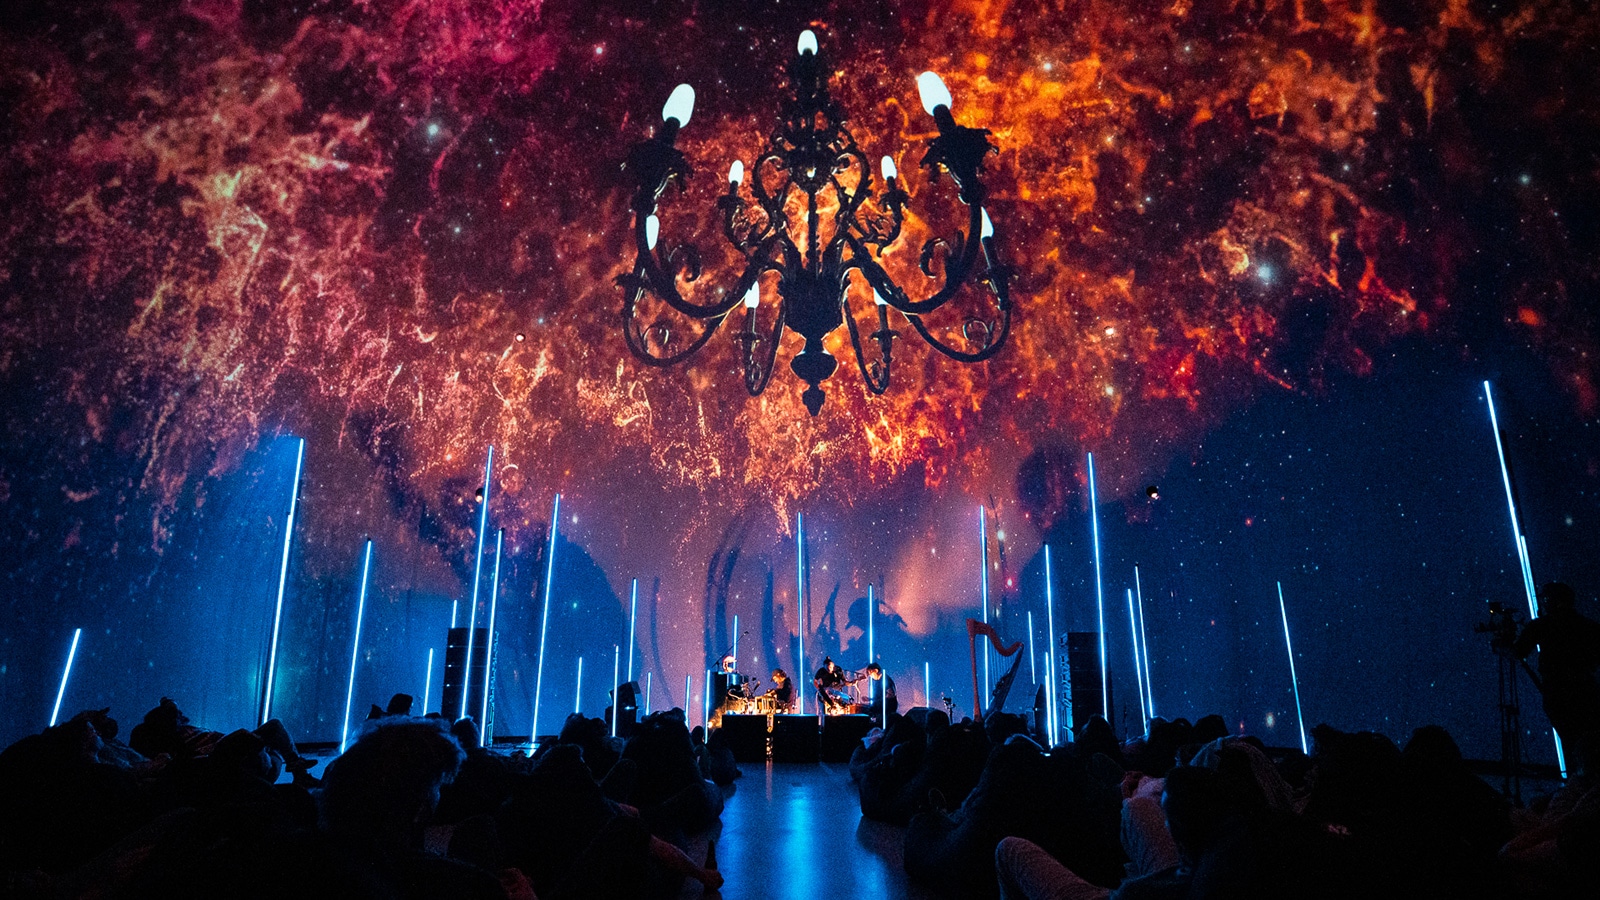 Spacemap Go Proves a Highlight of MUTEK 2020 